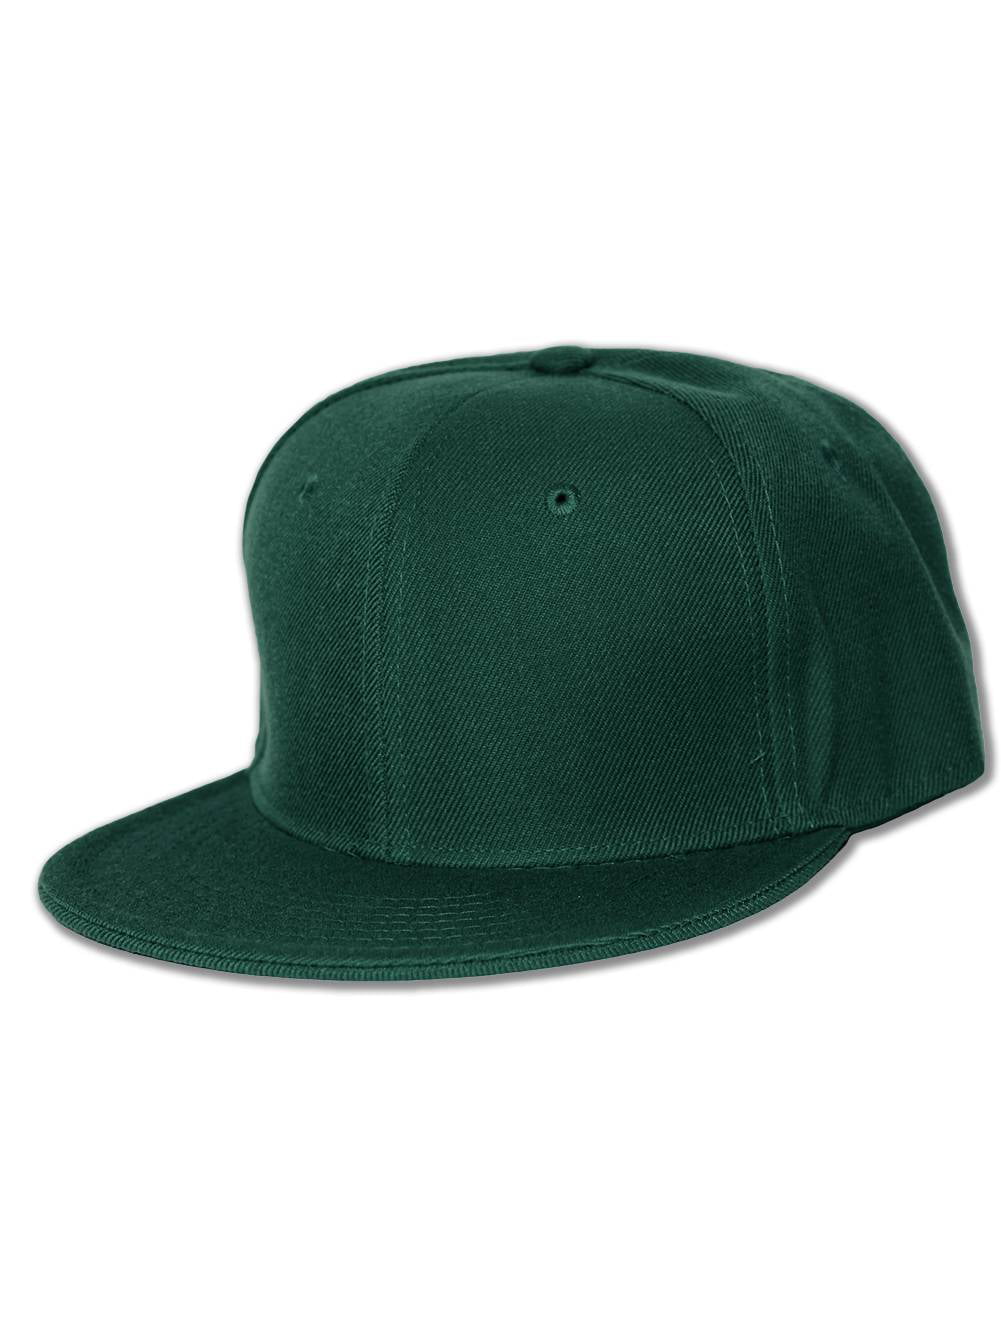 New Blank Baseball Flat Bill Fitted Hat Cap - Forest Green 7 3/8 